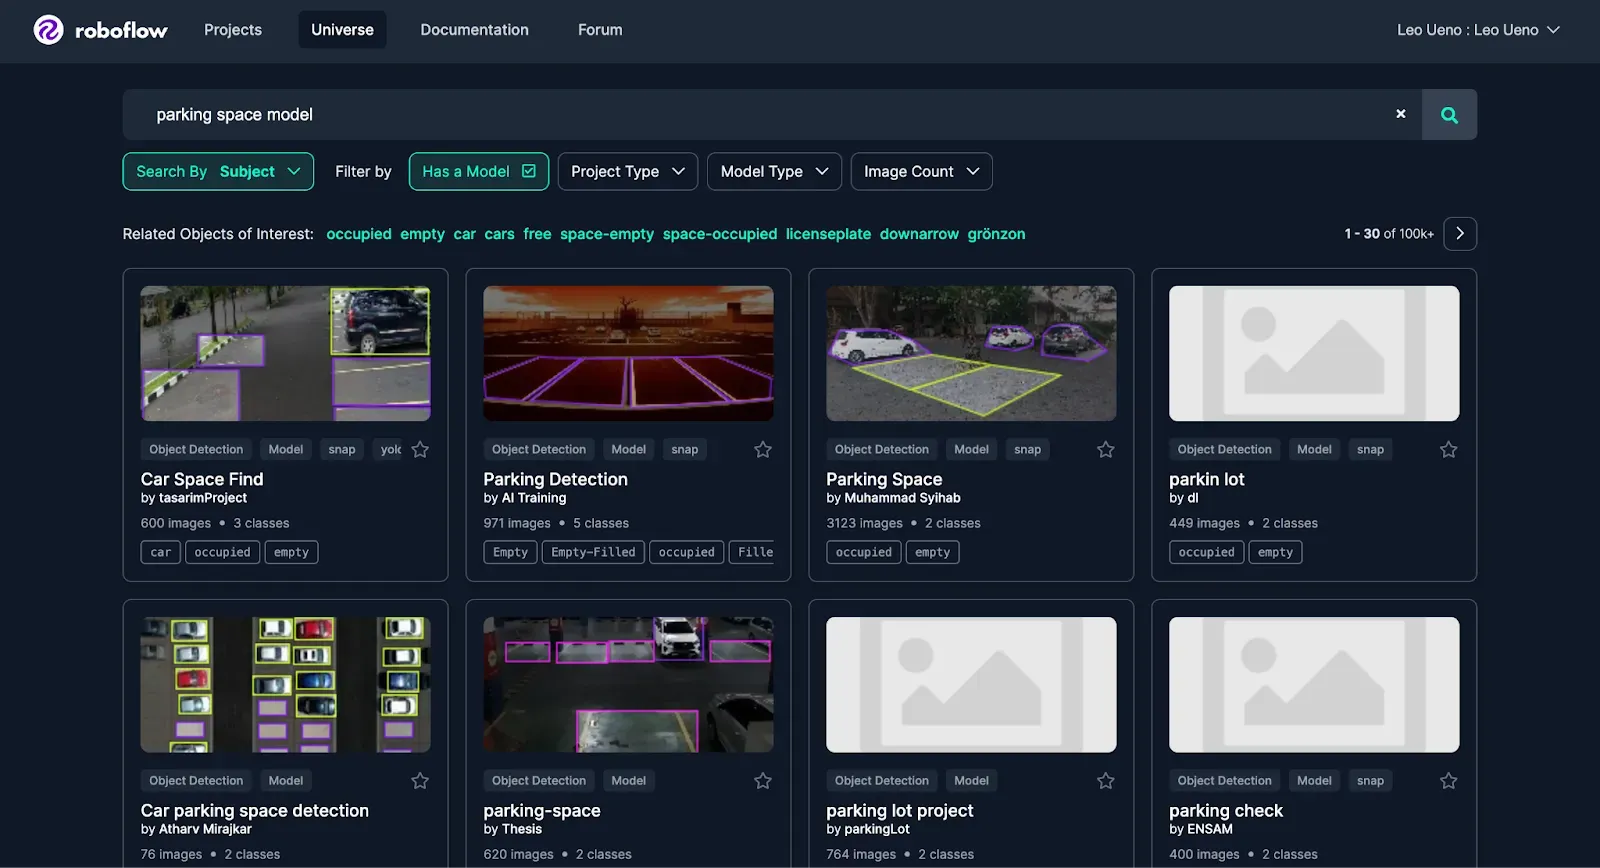 A screenshot of a search for a parking space detection model on Roboflow Universe